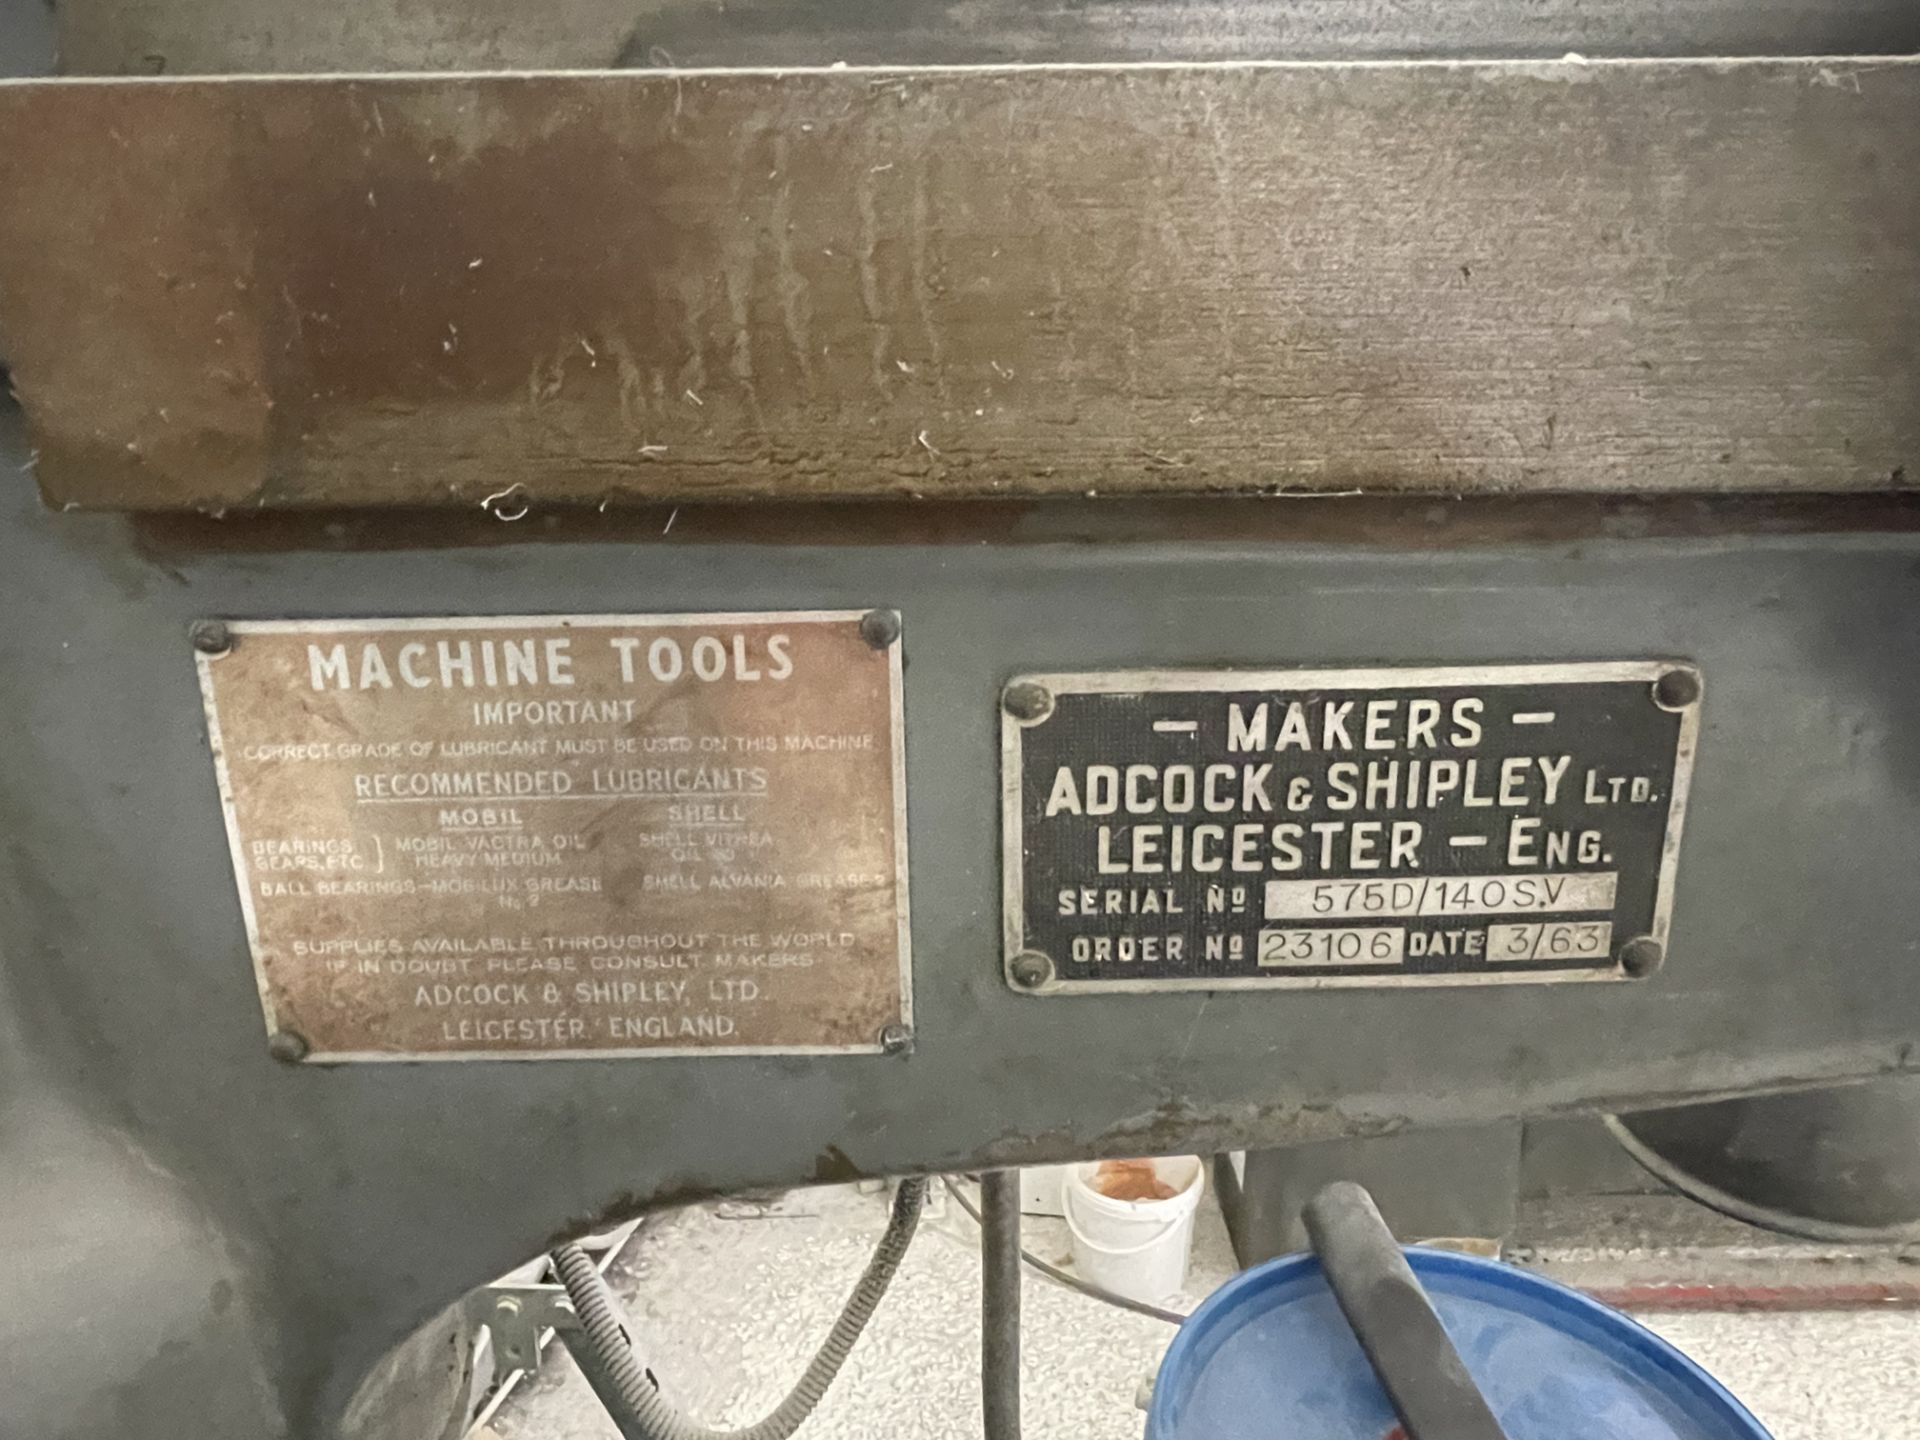 1963 Adcock & Shipley Radial Drill S/No. 3575D/140SV, 3-Phase with Machine Vice - Image 7 of 7